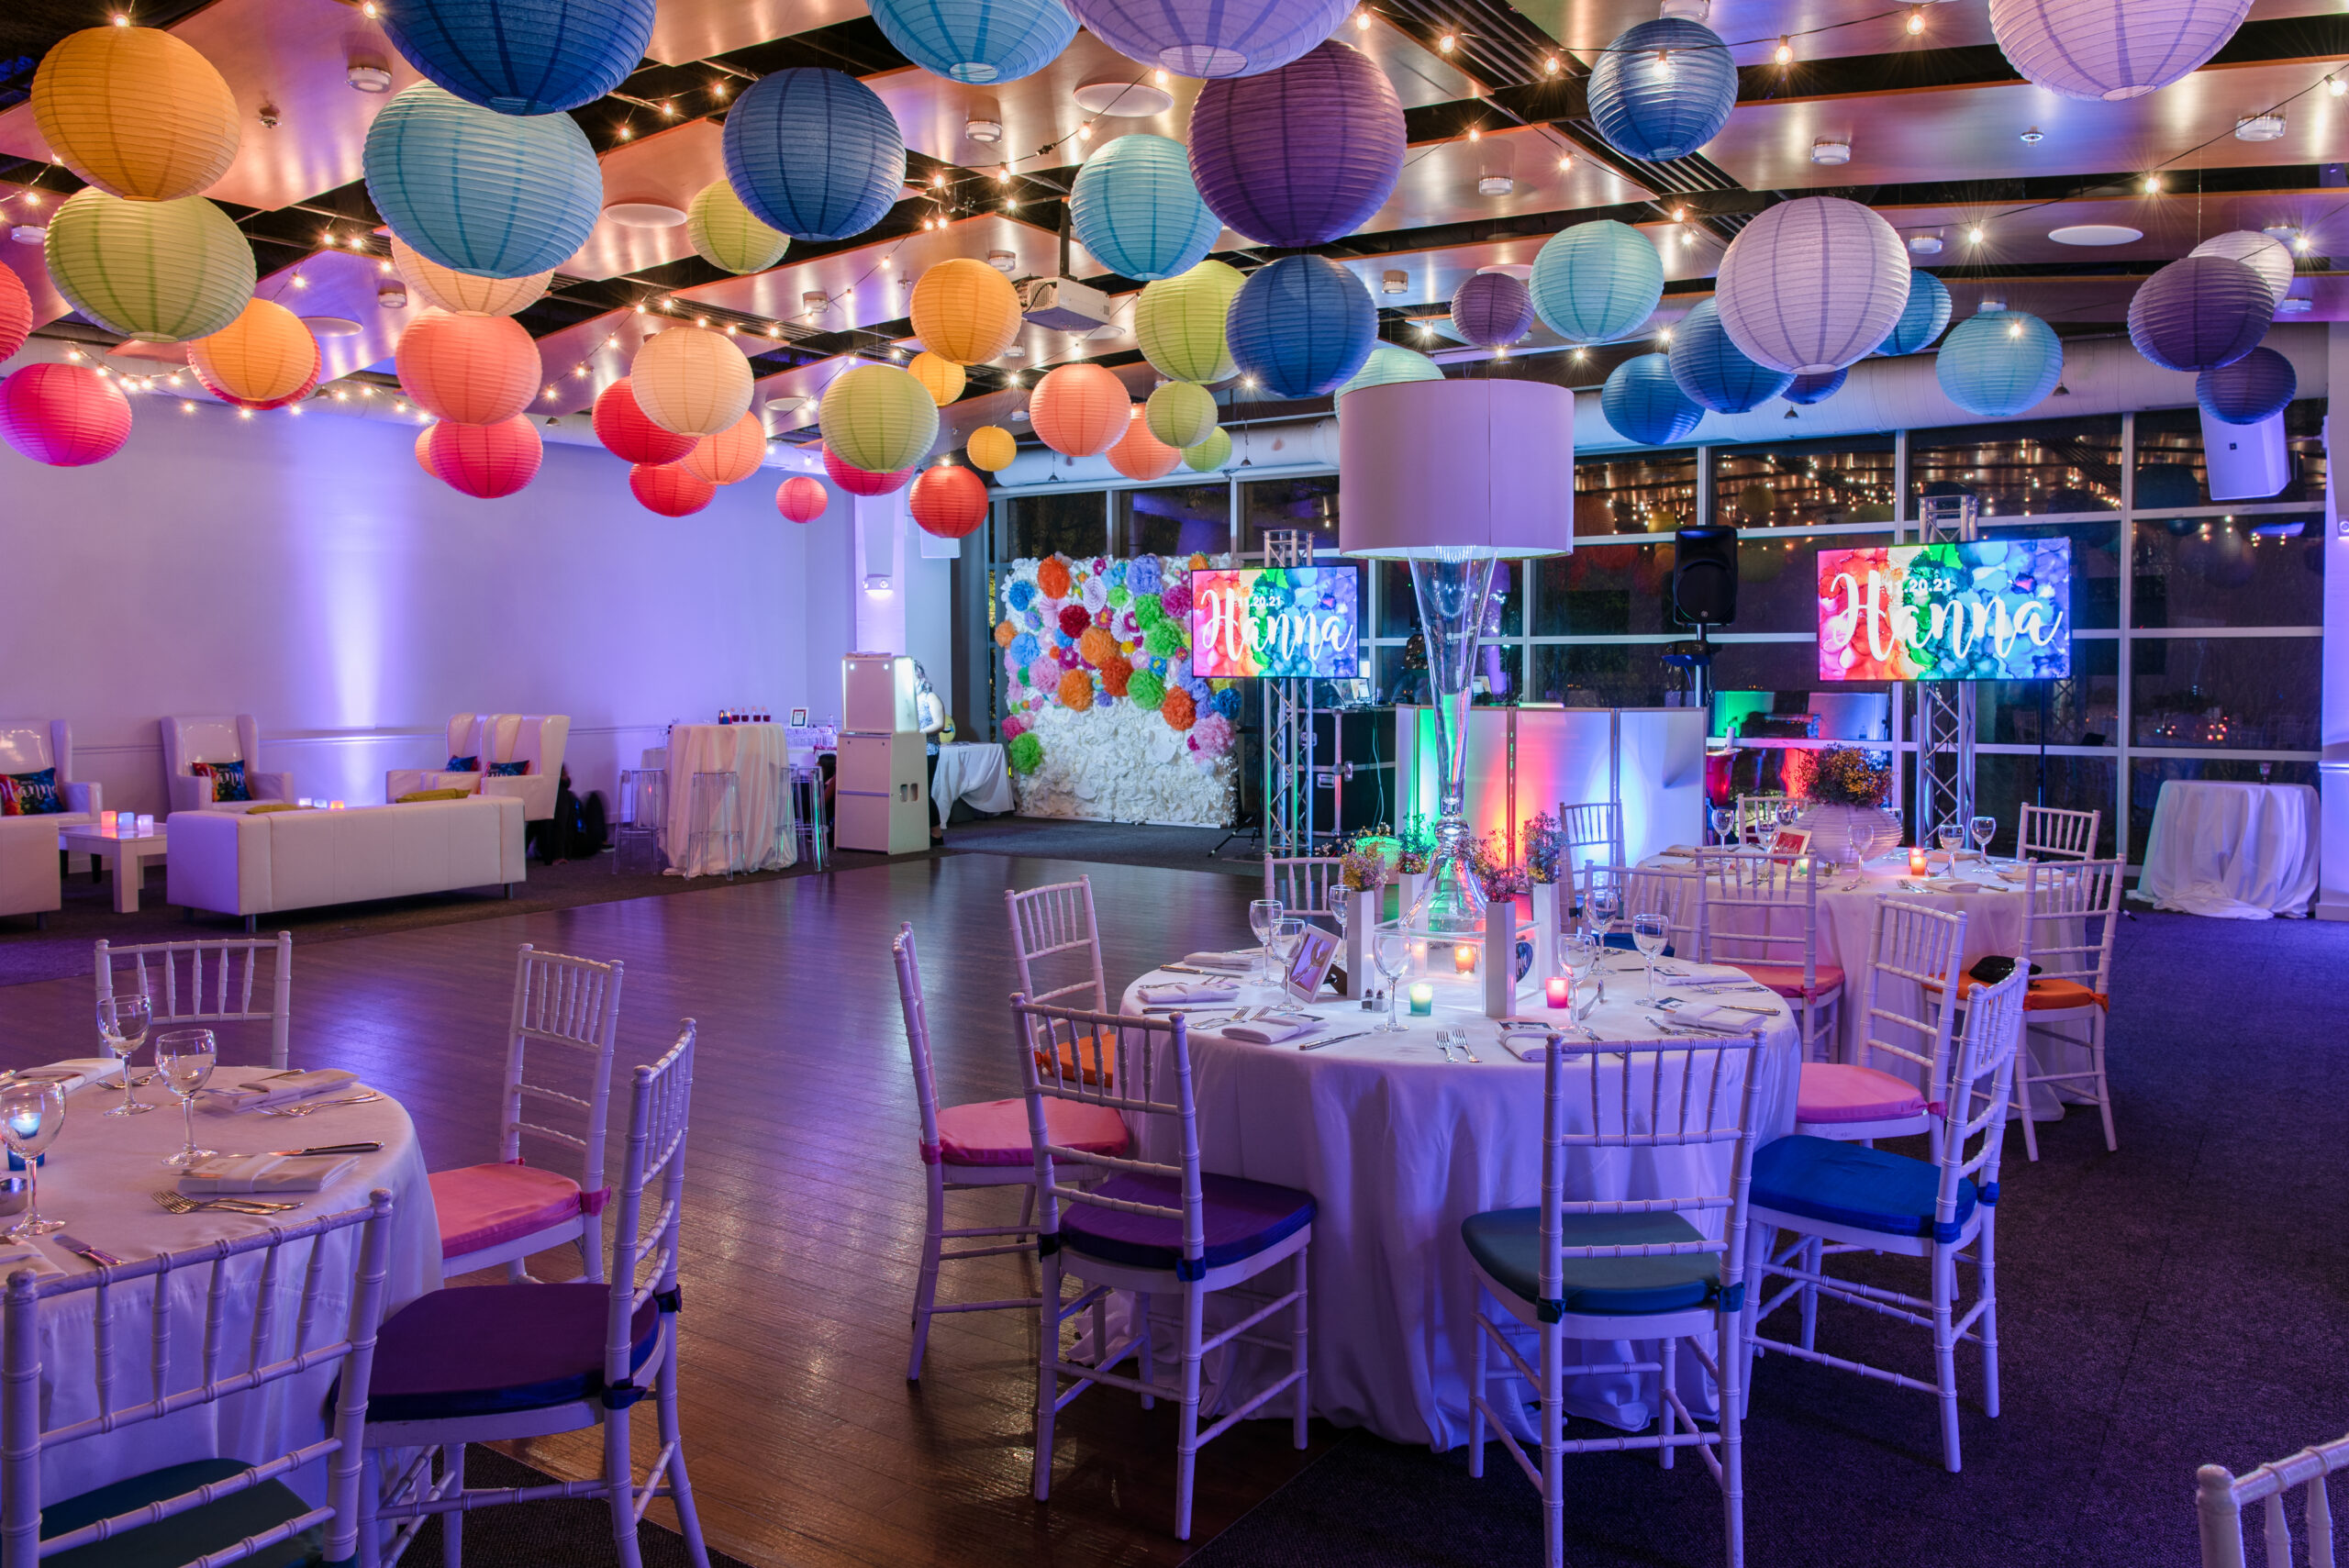 Centerpieces at Hanna's colorful rainbow paper lantern Bat Mitzvah at VisArts | Pop Color Events | Adding a Pop of Color to Bar & Bat Mitzvahs in DC, MD & VA | Photo by: Greg Land